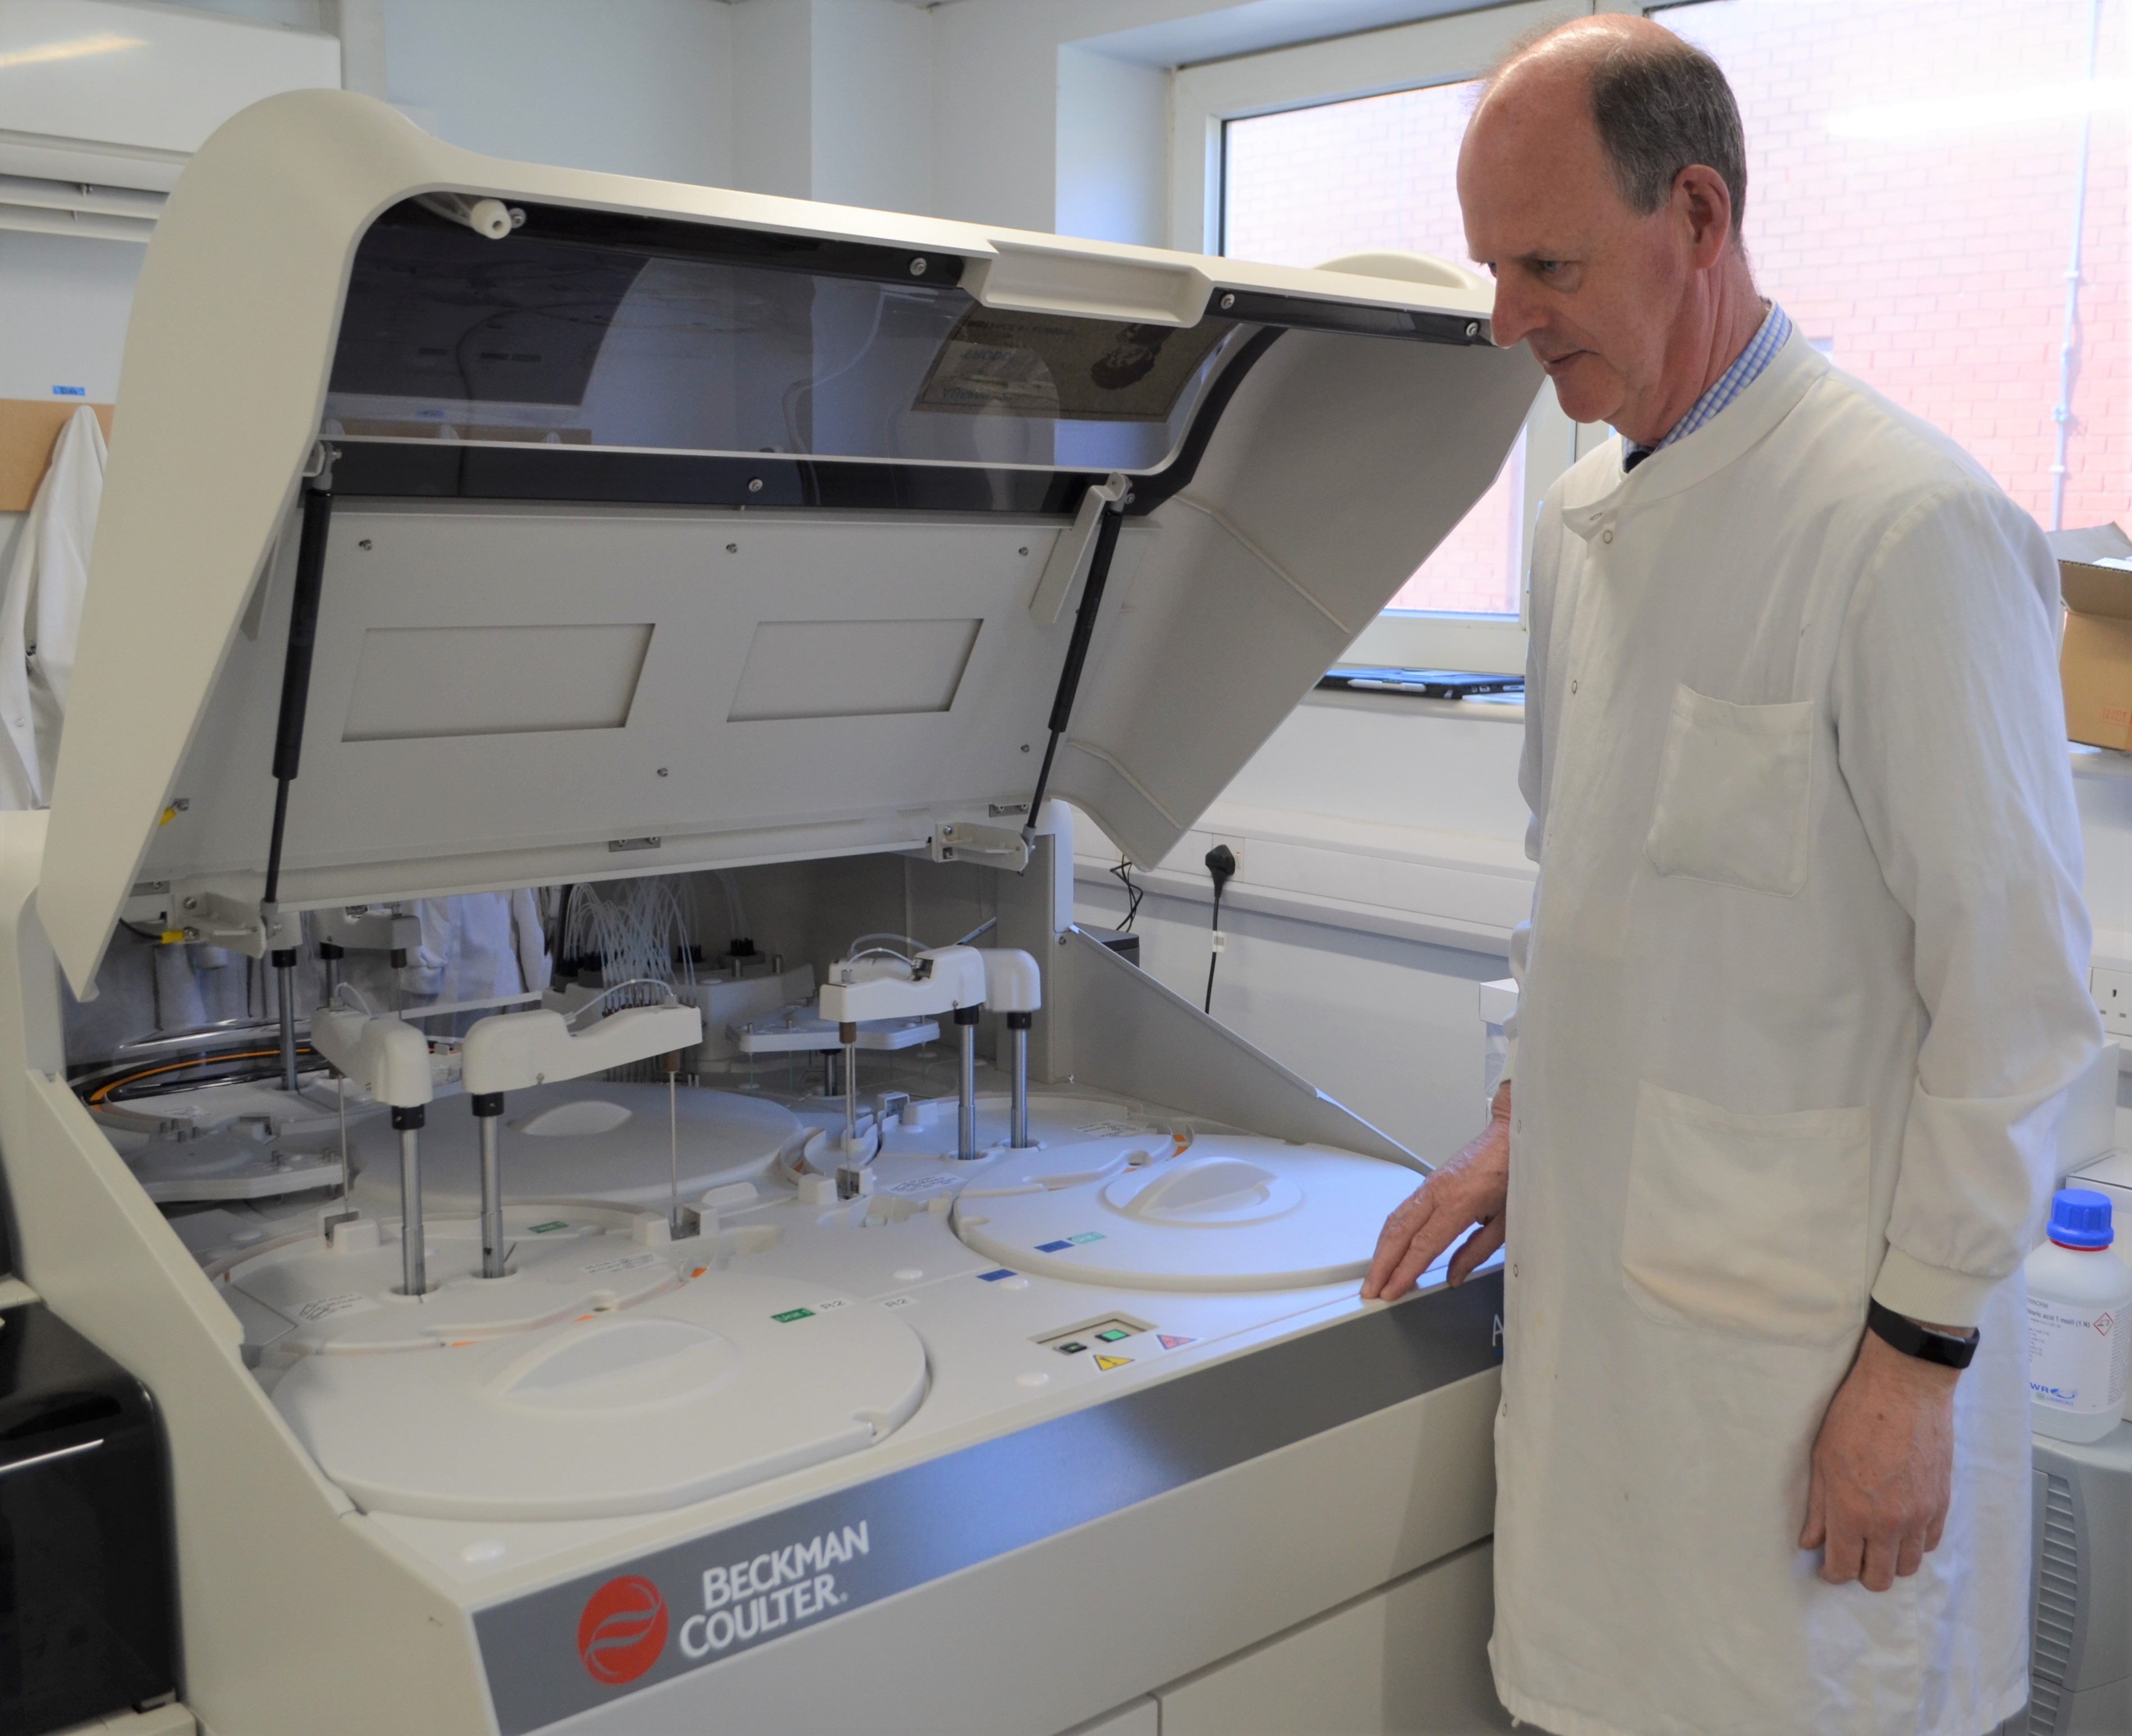 New equipment will improve efficiency of biochemistry service featured image